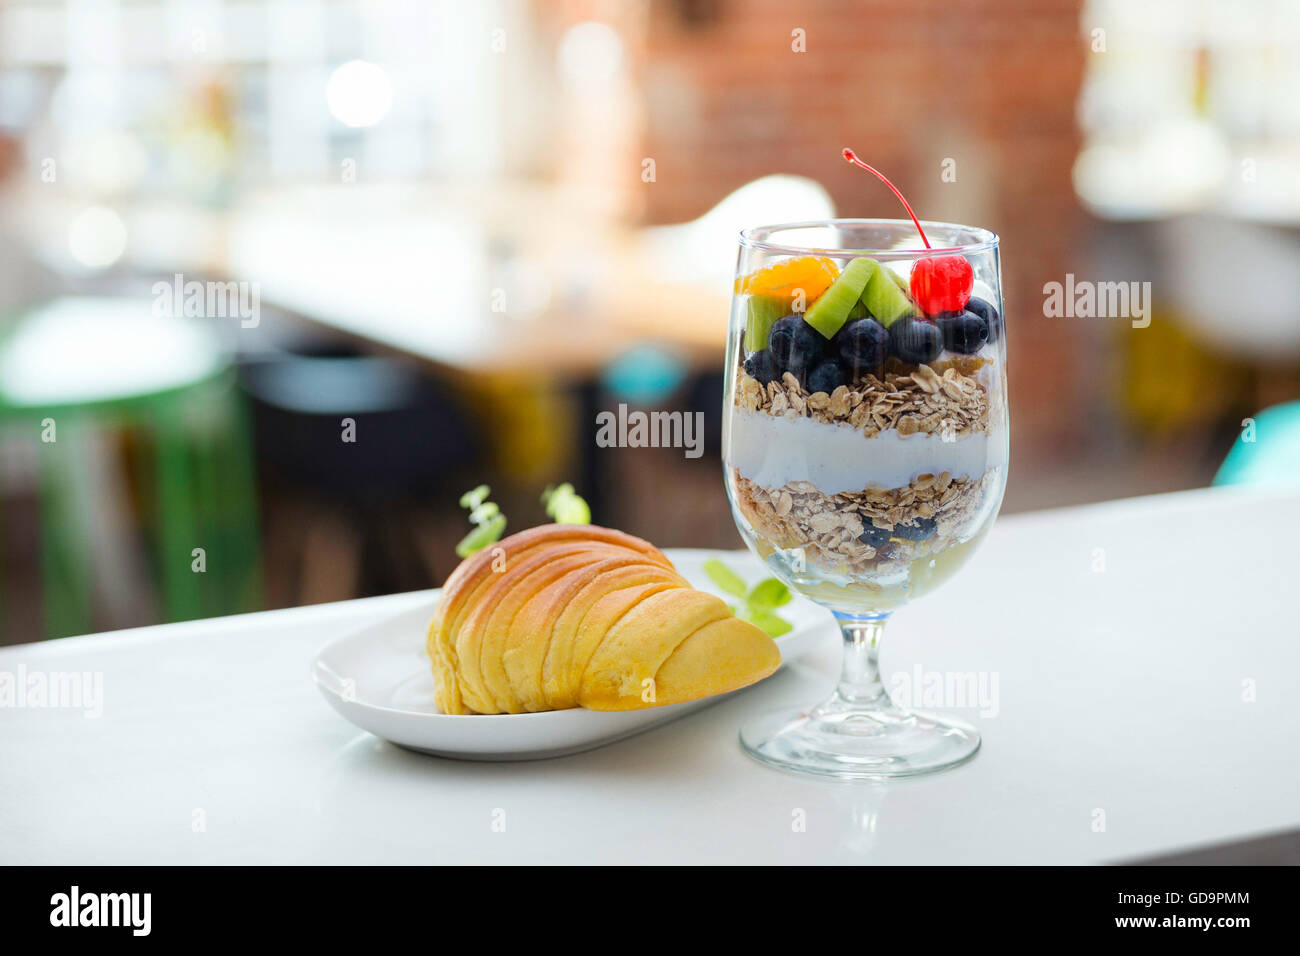 Healthy fruit cereal and croissant breakfast in modern hotel restaurant. Blurred background. Stock Photo